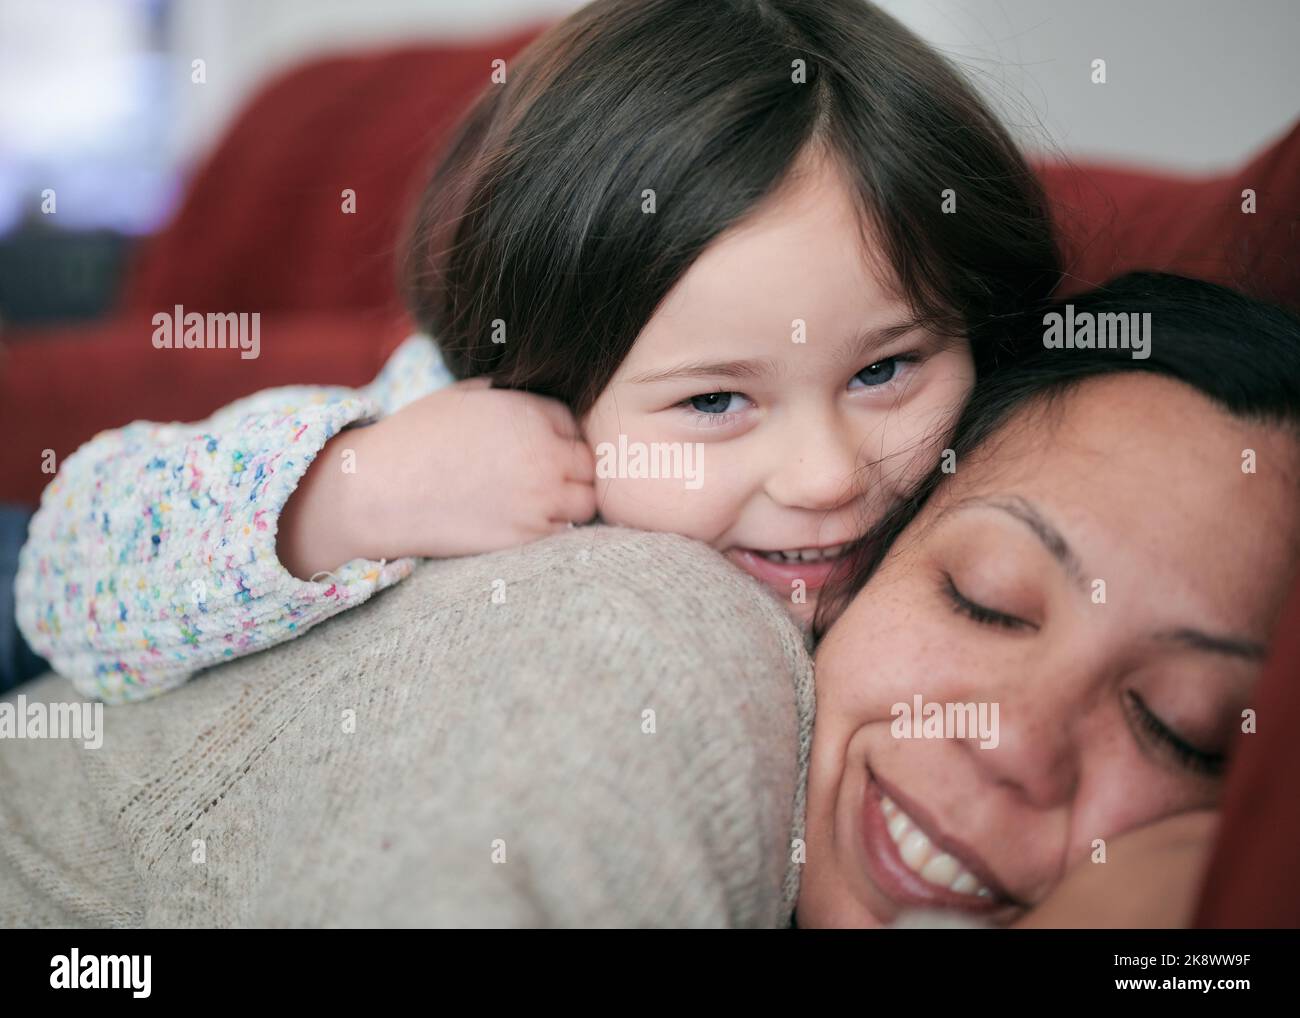 Young girl hugging mom with affection Stock Photo